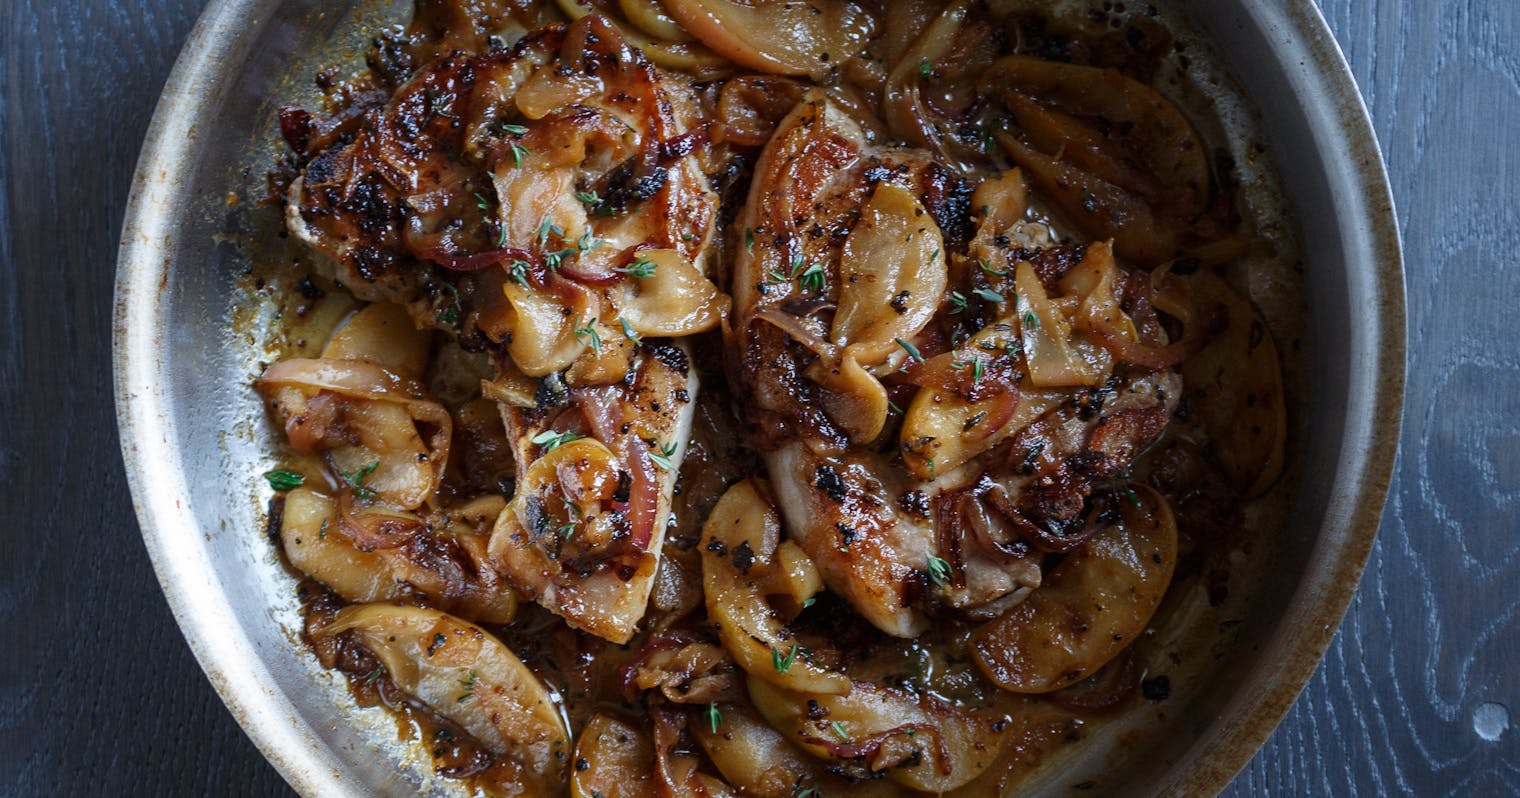 Best Pork Chops with Caramelized Apples and Onions Recipe 